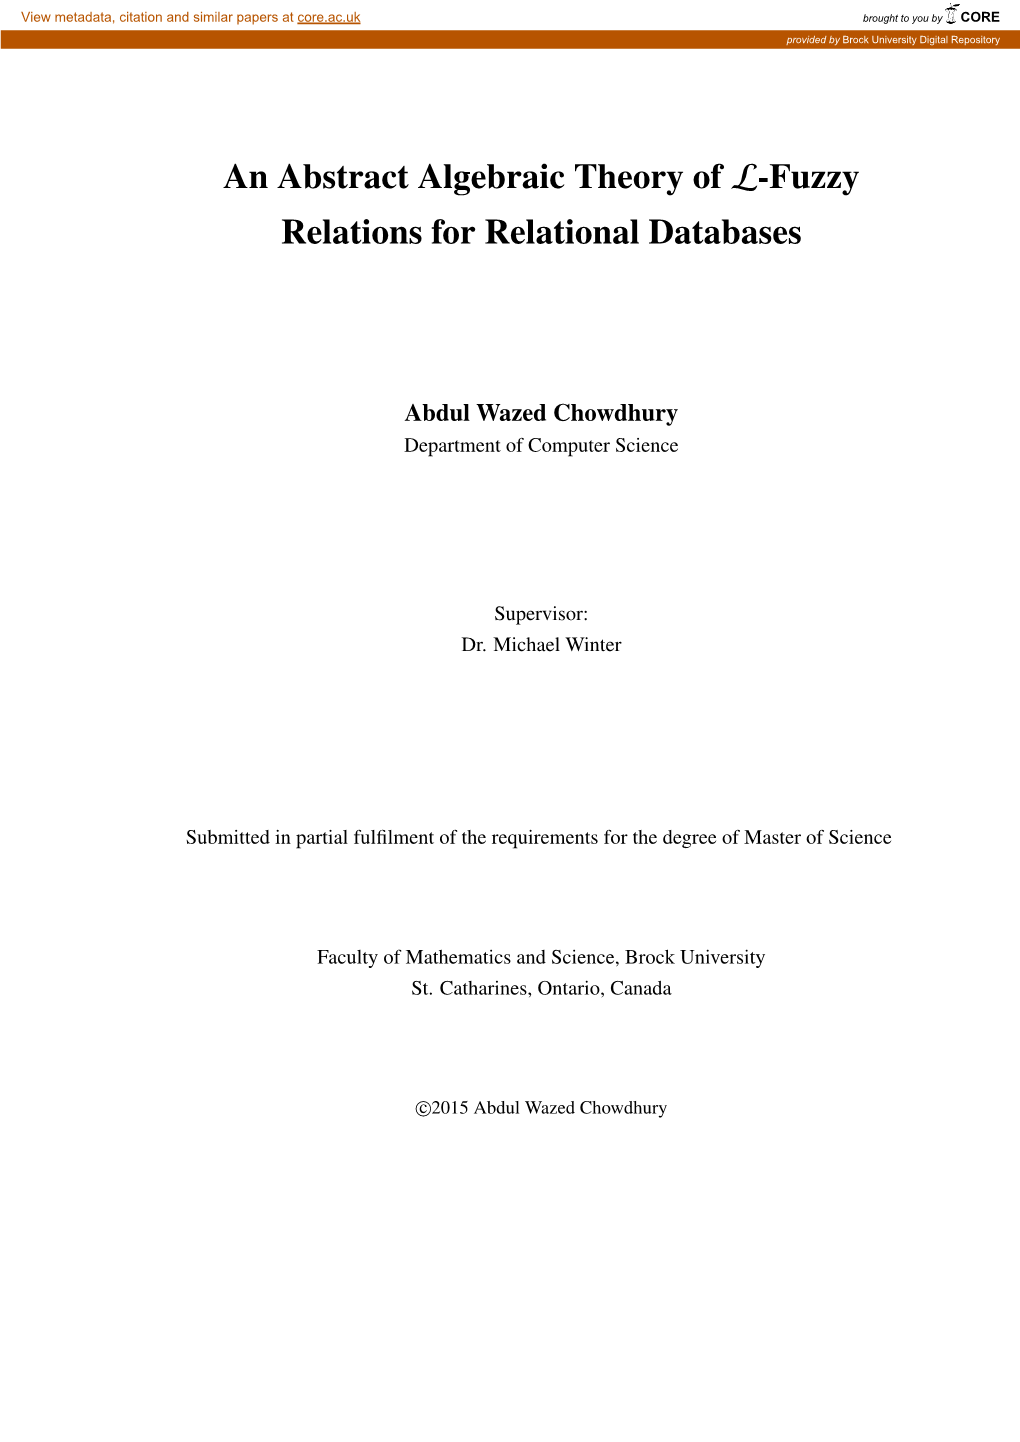 An Abstract Algebraic Theory of L-Fuzzy Relations for Relational Databases